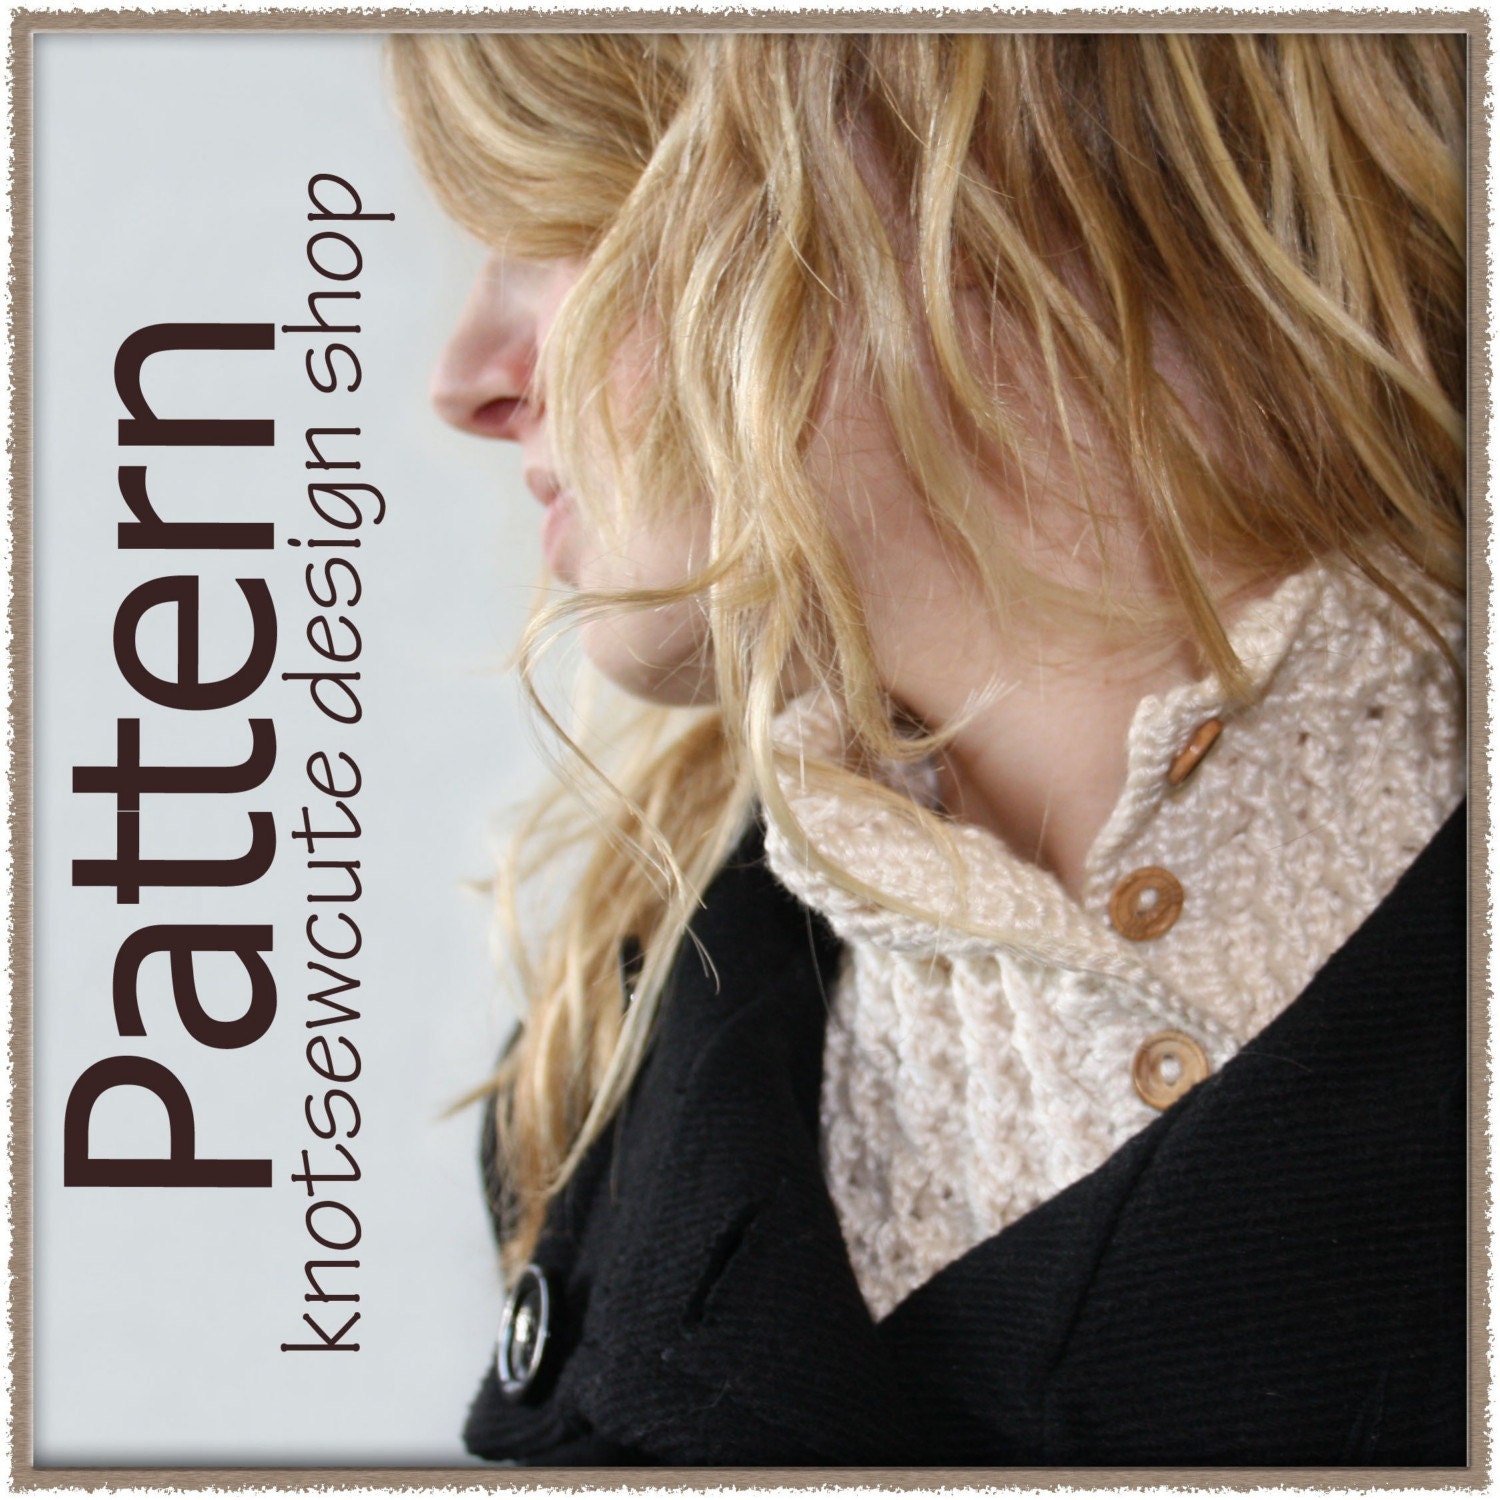 KNITTED COLLAR PATTERNS | - | Just another WordPress site